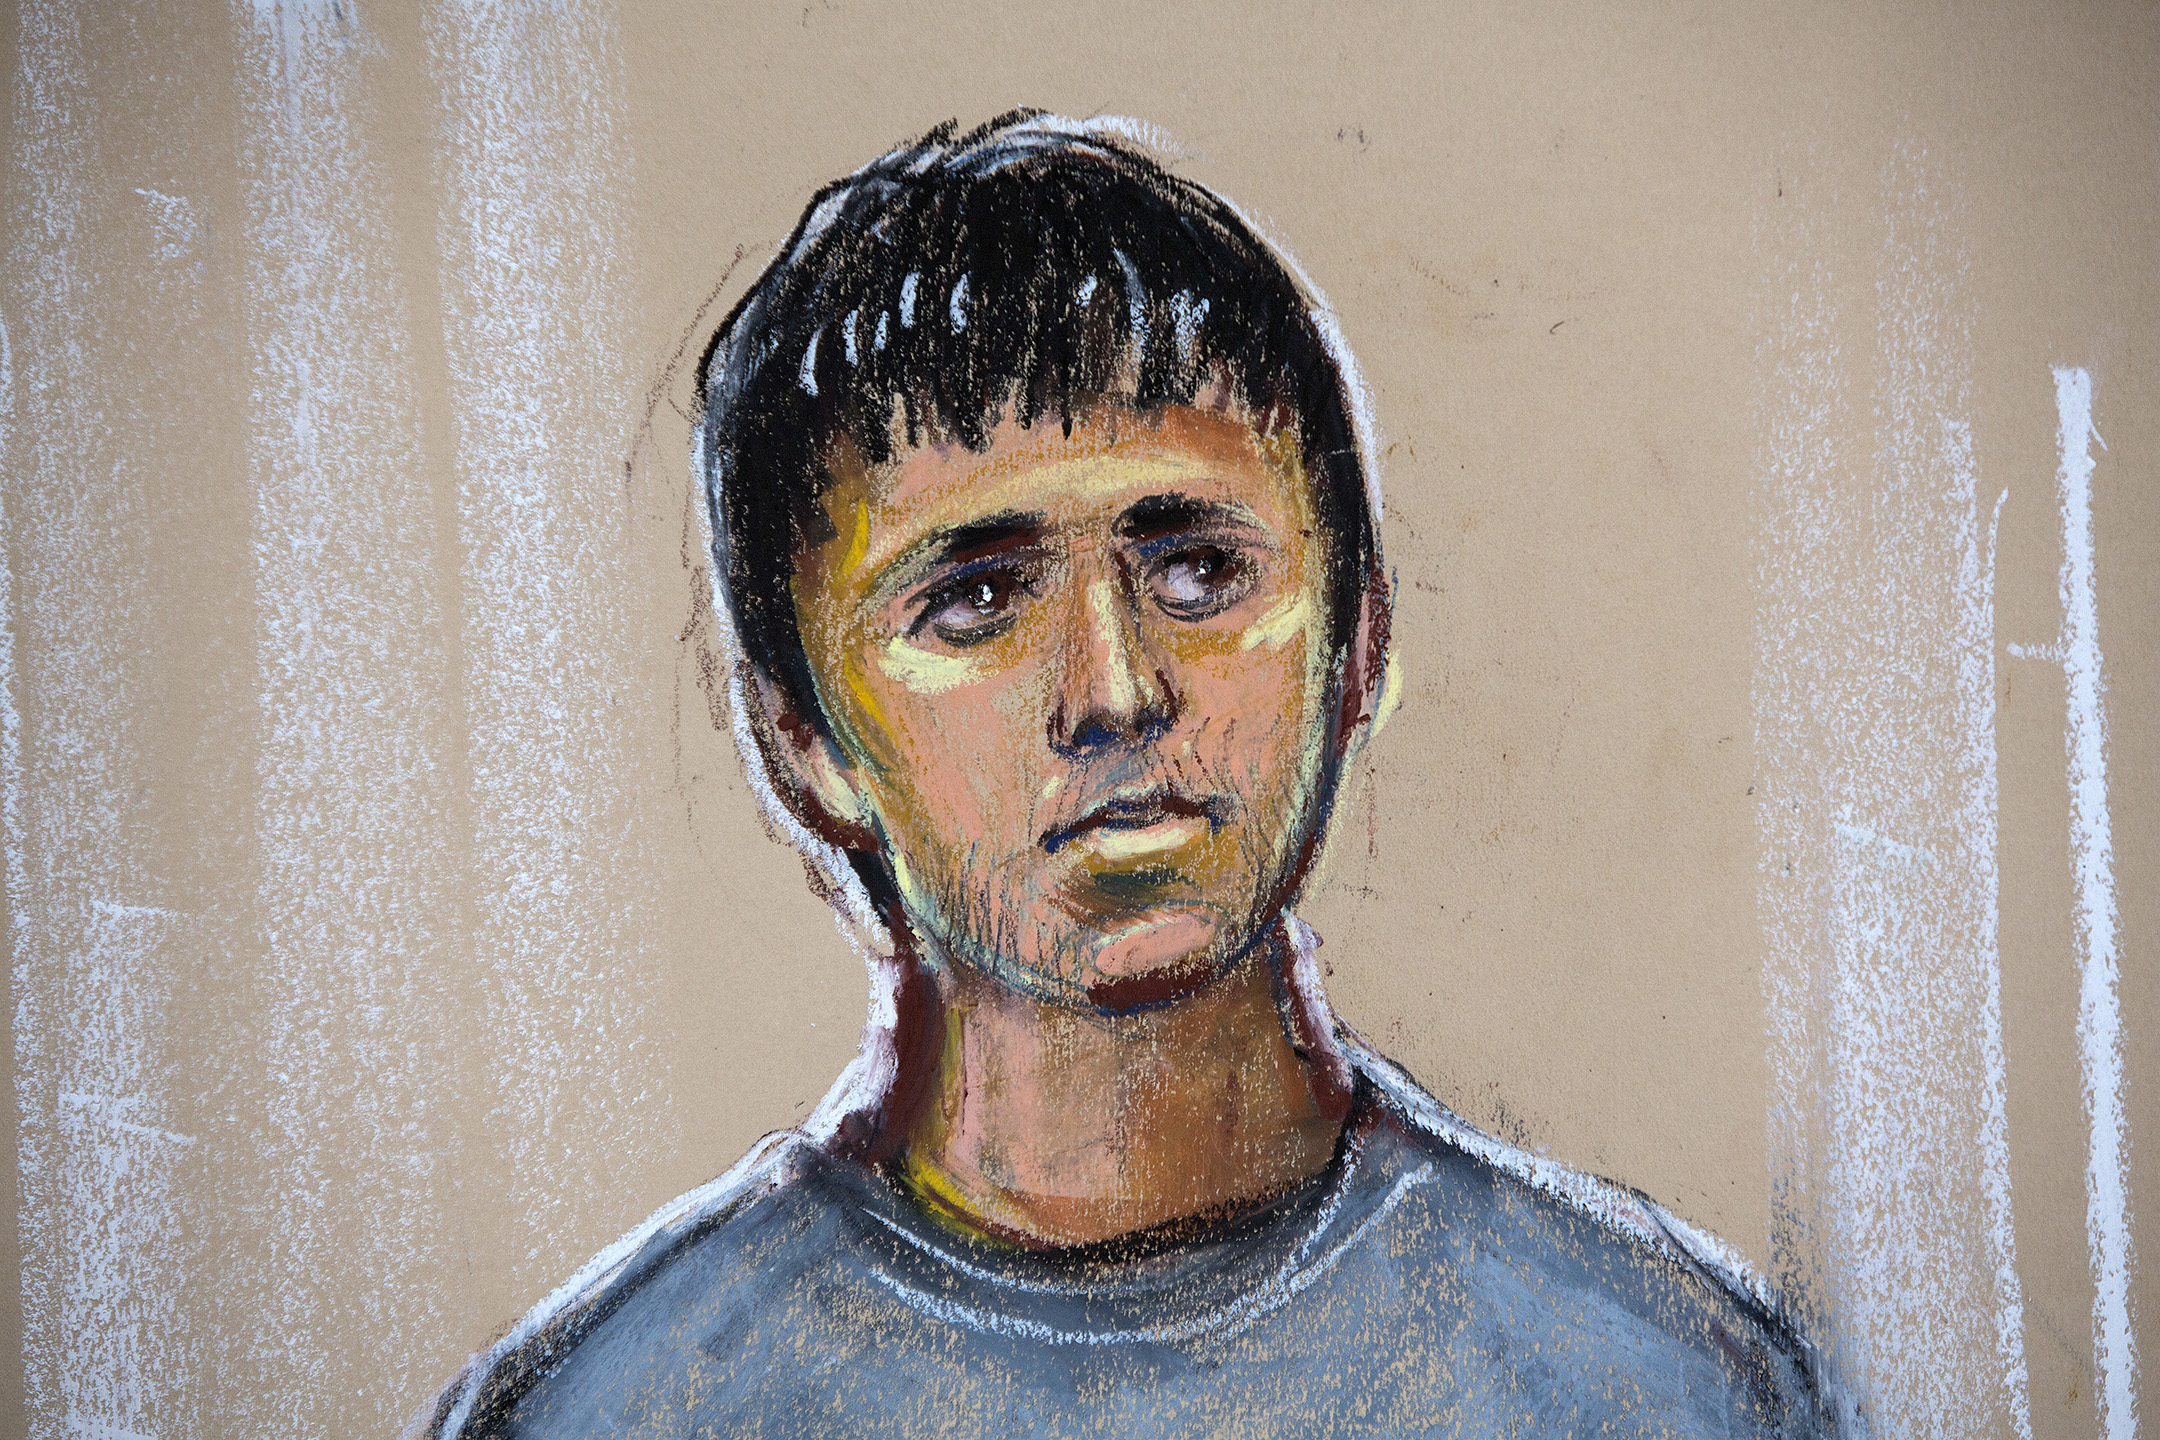 An artist courtroom sketch shows Navinder Singh Sarao, 36, as he stands in the dock during his second appearance at Westminster magistrates court, in London, U.K., on Wednesday, April 29, 2015.
